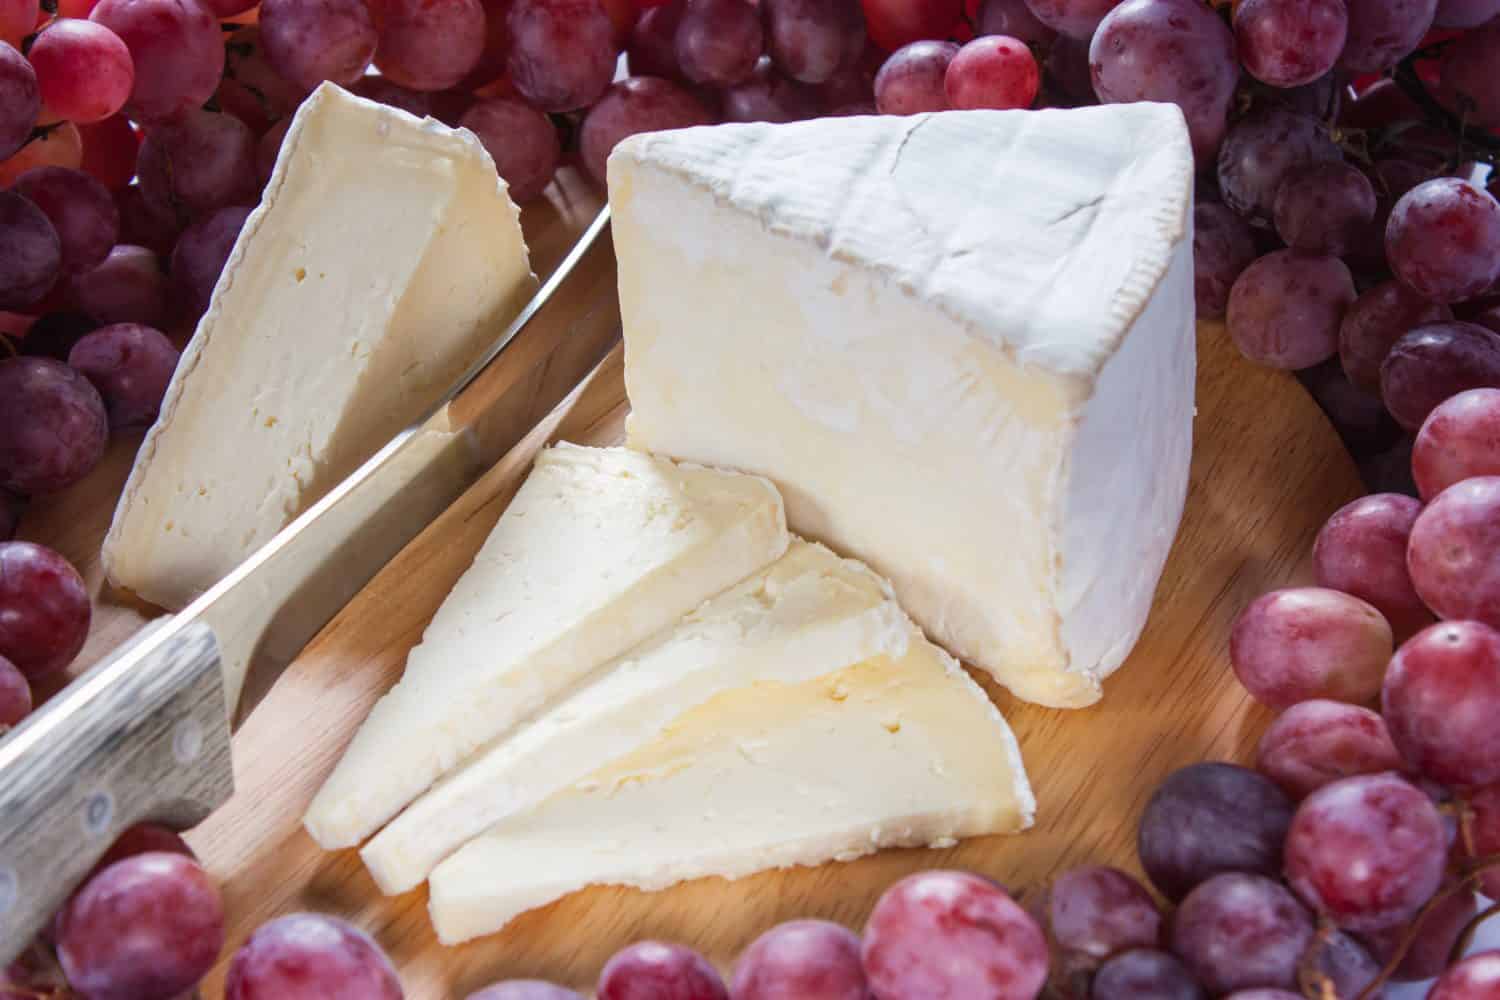 French cheese with white noble mold St. Andre on a cutting board with a knife surrounded by red grapes, horizontal